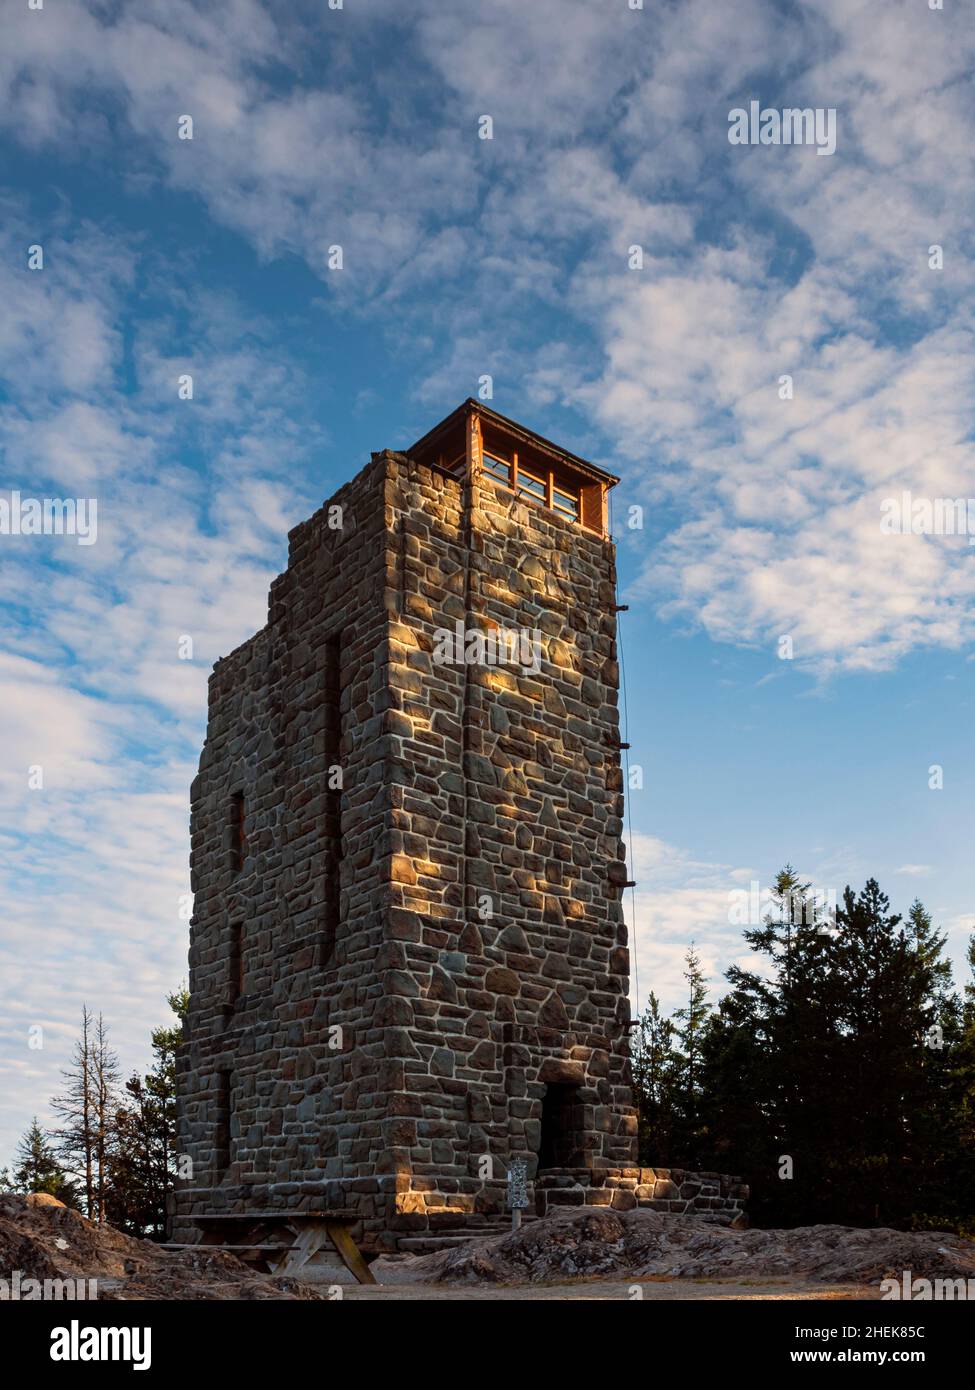 WA21048-00...WASHINGTON - Mt. Constitution Observation Tower on the summit of Mt. Constitution in Moran State Park on Orcas Island. Stock Photo